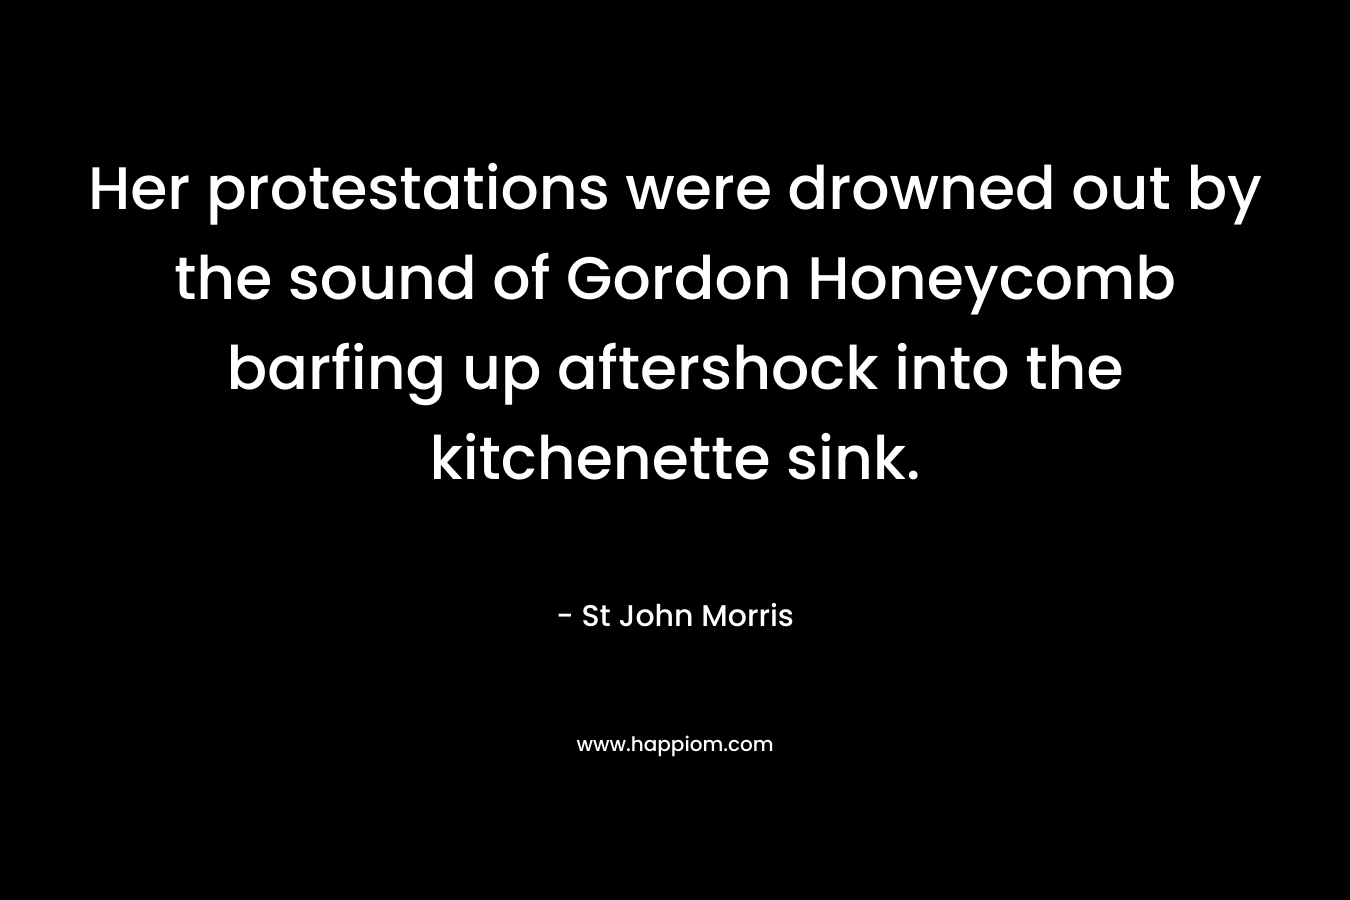 Her protestations were drowned out by the sound of Gordon Honeycomb barfing up aftershock into the kitchenette sink. – St John Morris